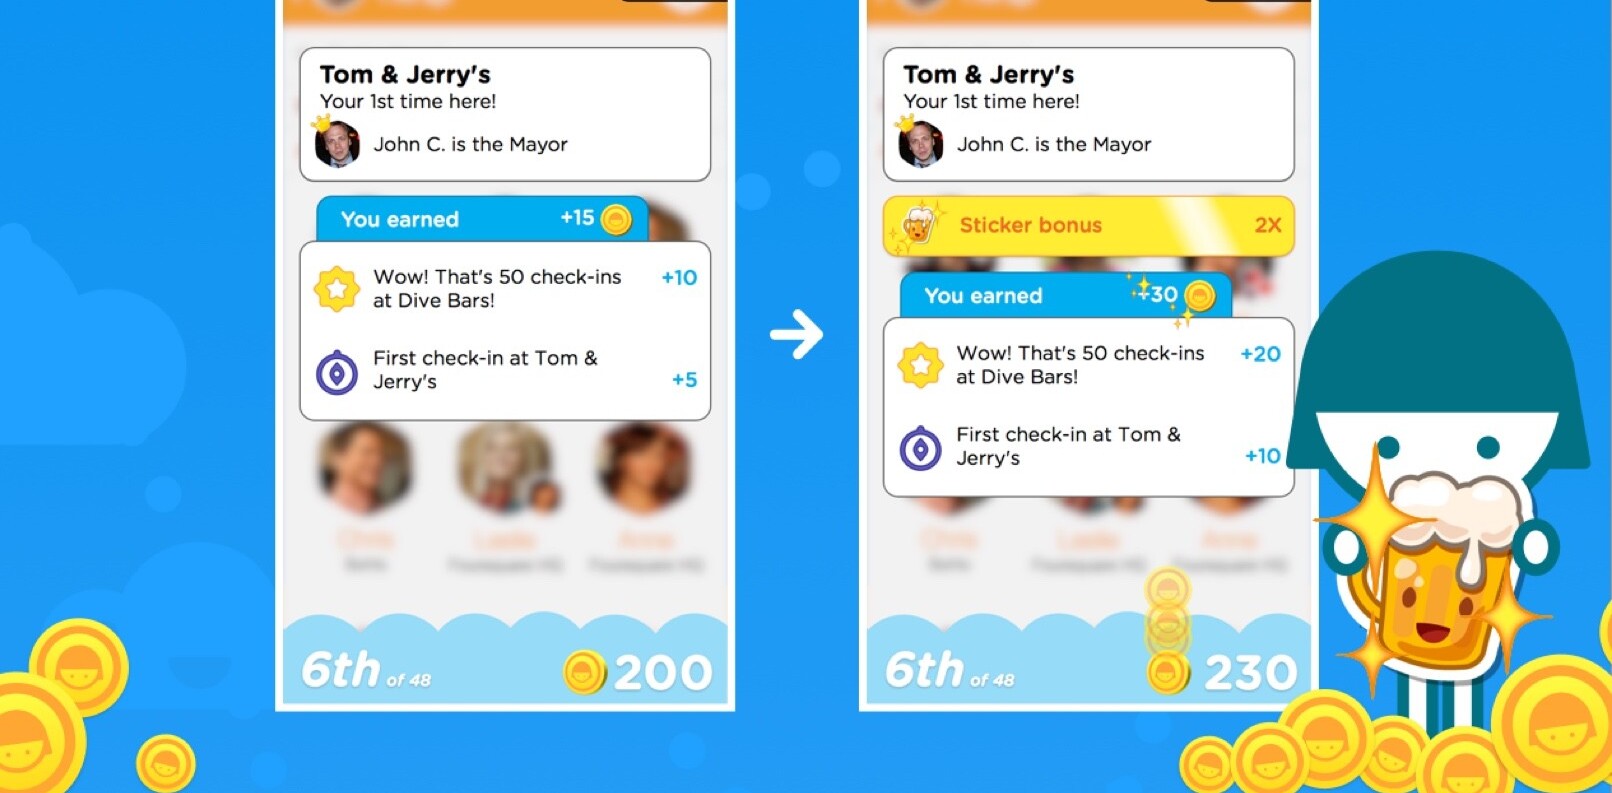 Foursquare’s Swarm gets an in-app virtual currency